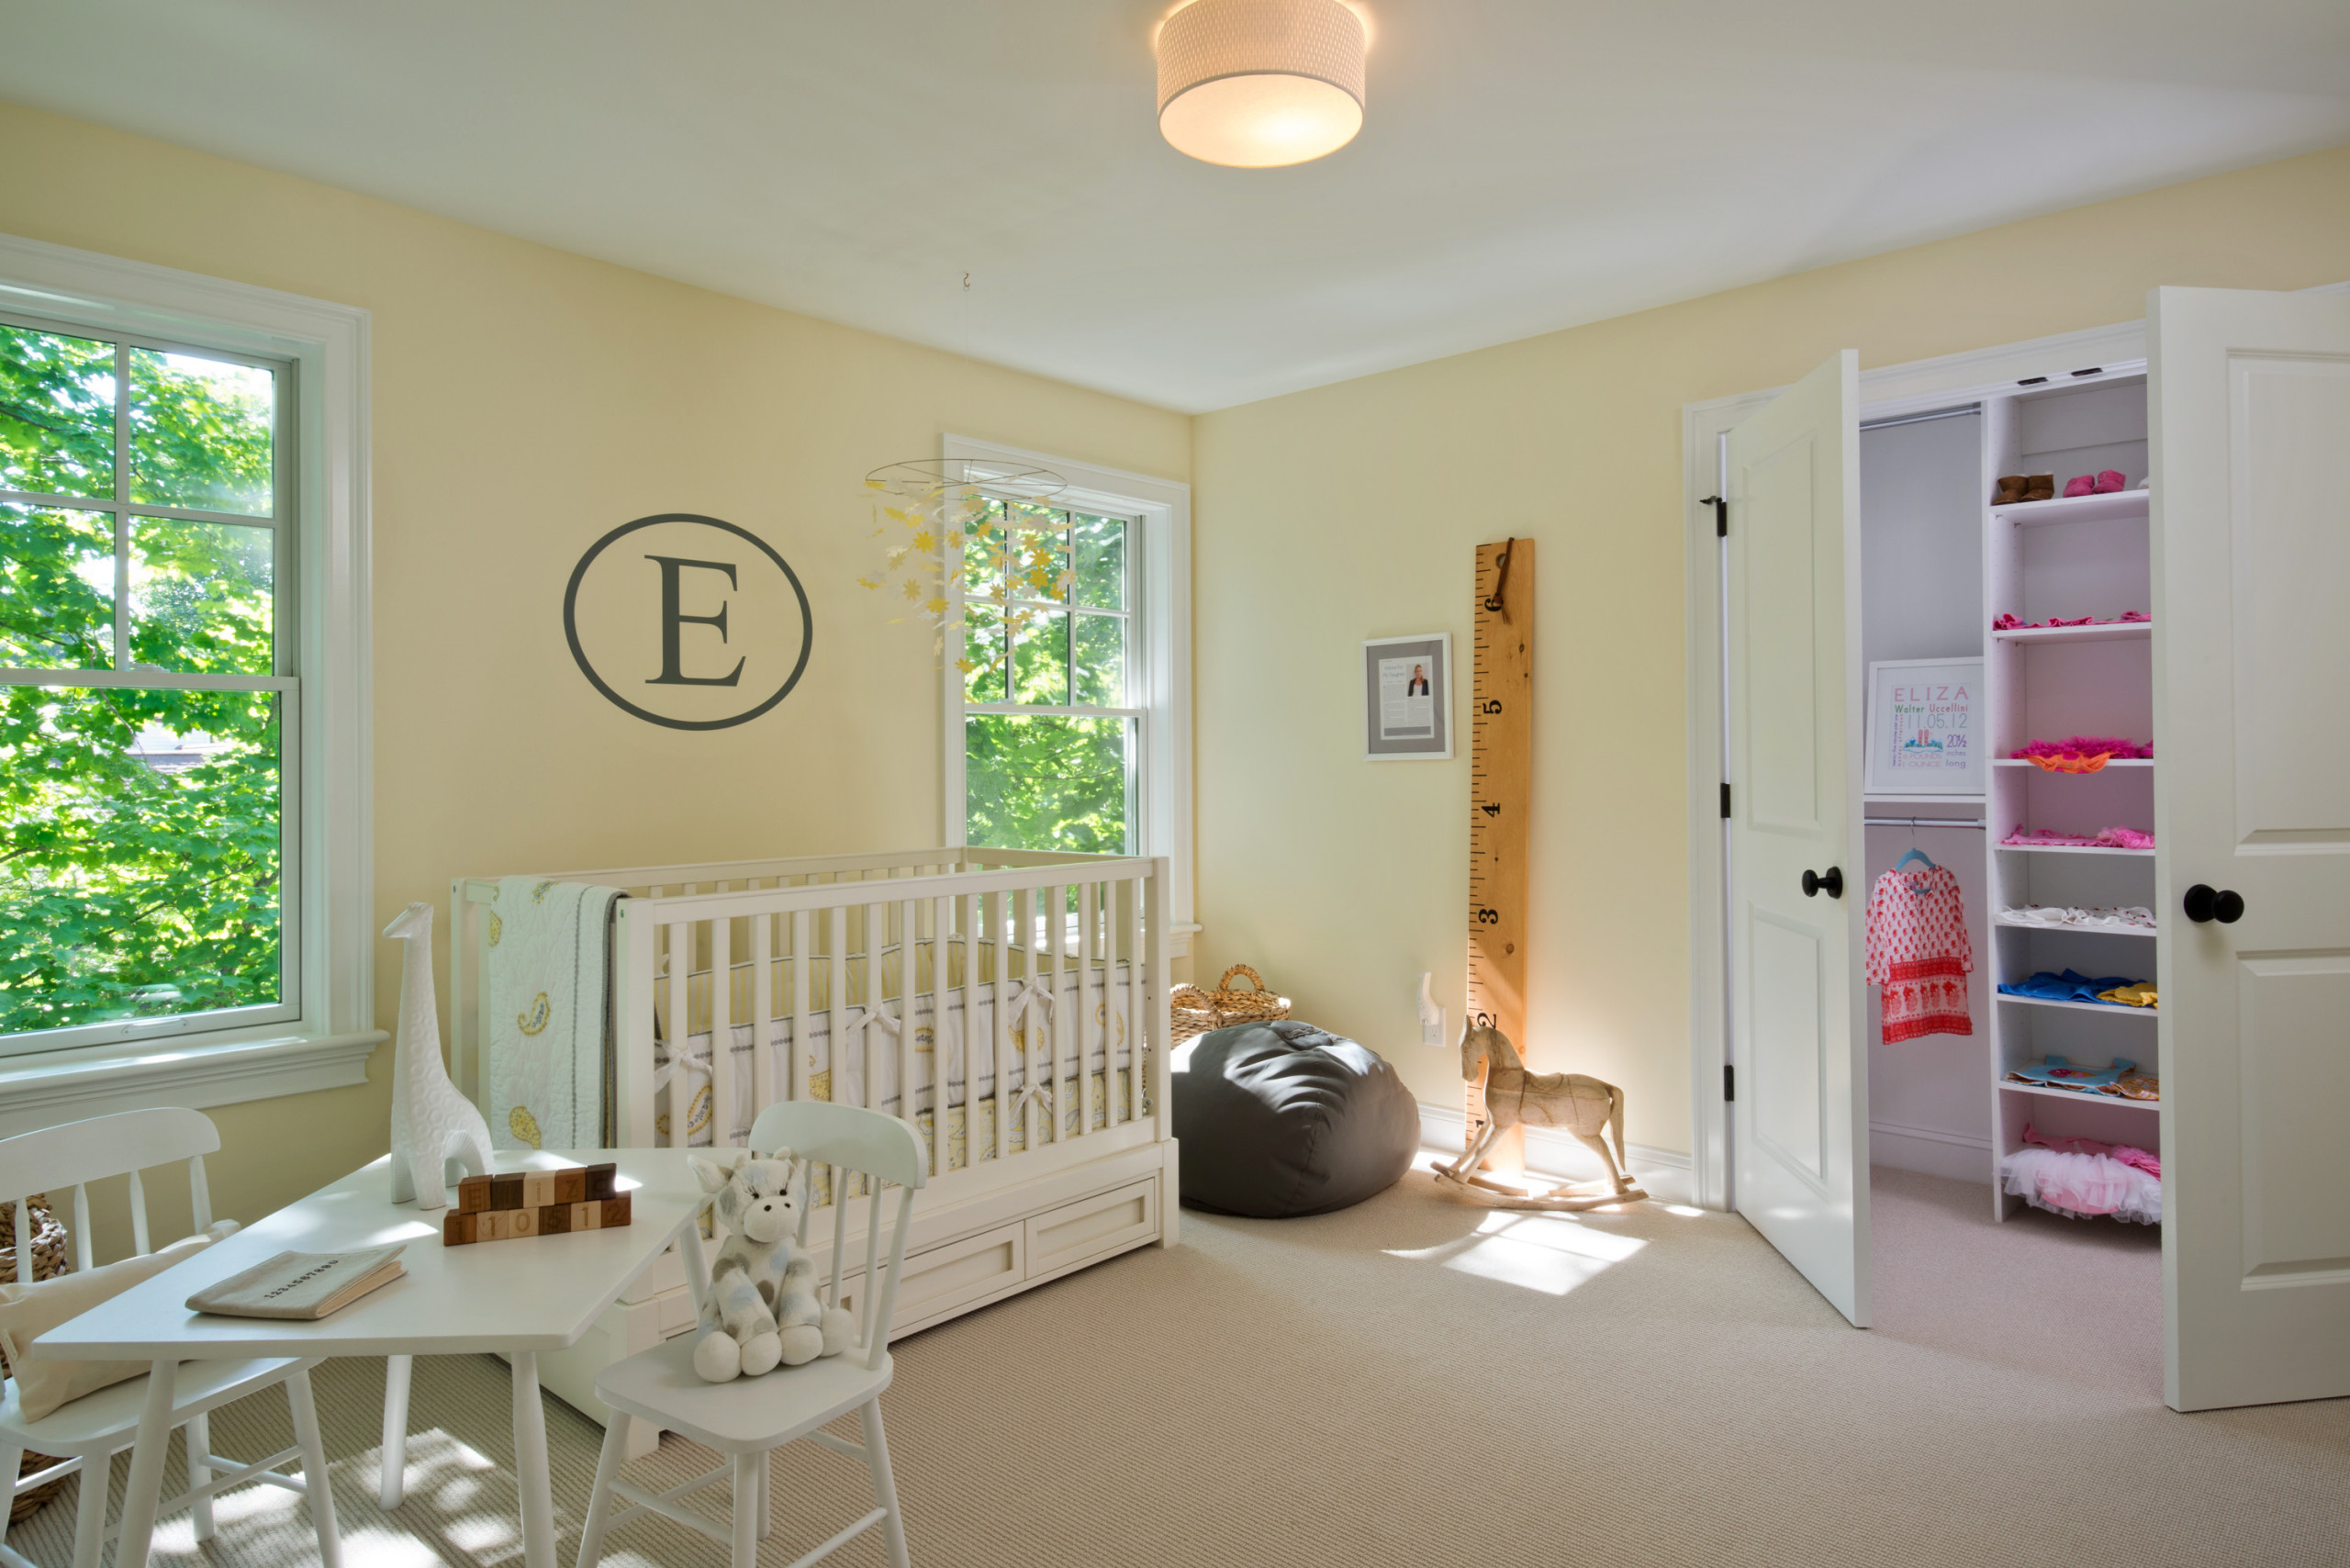 75 Beautiful Nursery With Yellow Walls Pictures Ideas April 2021 Houzz